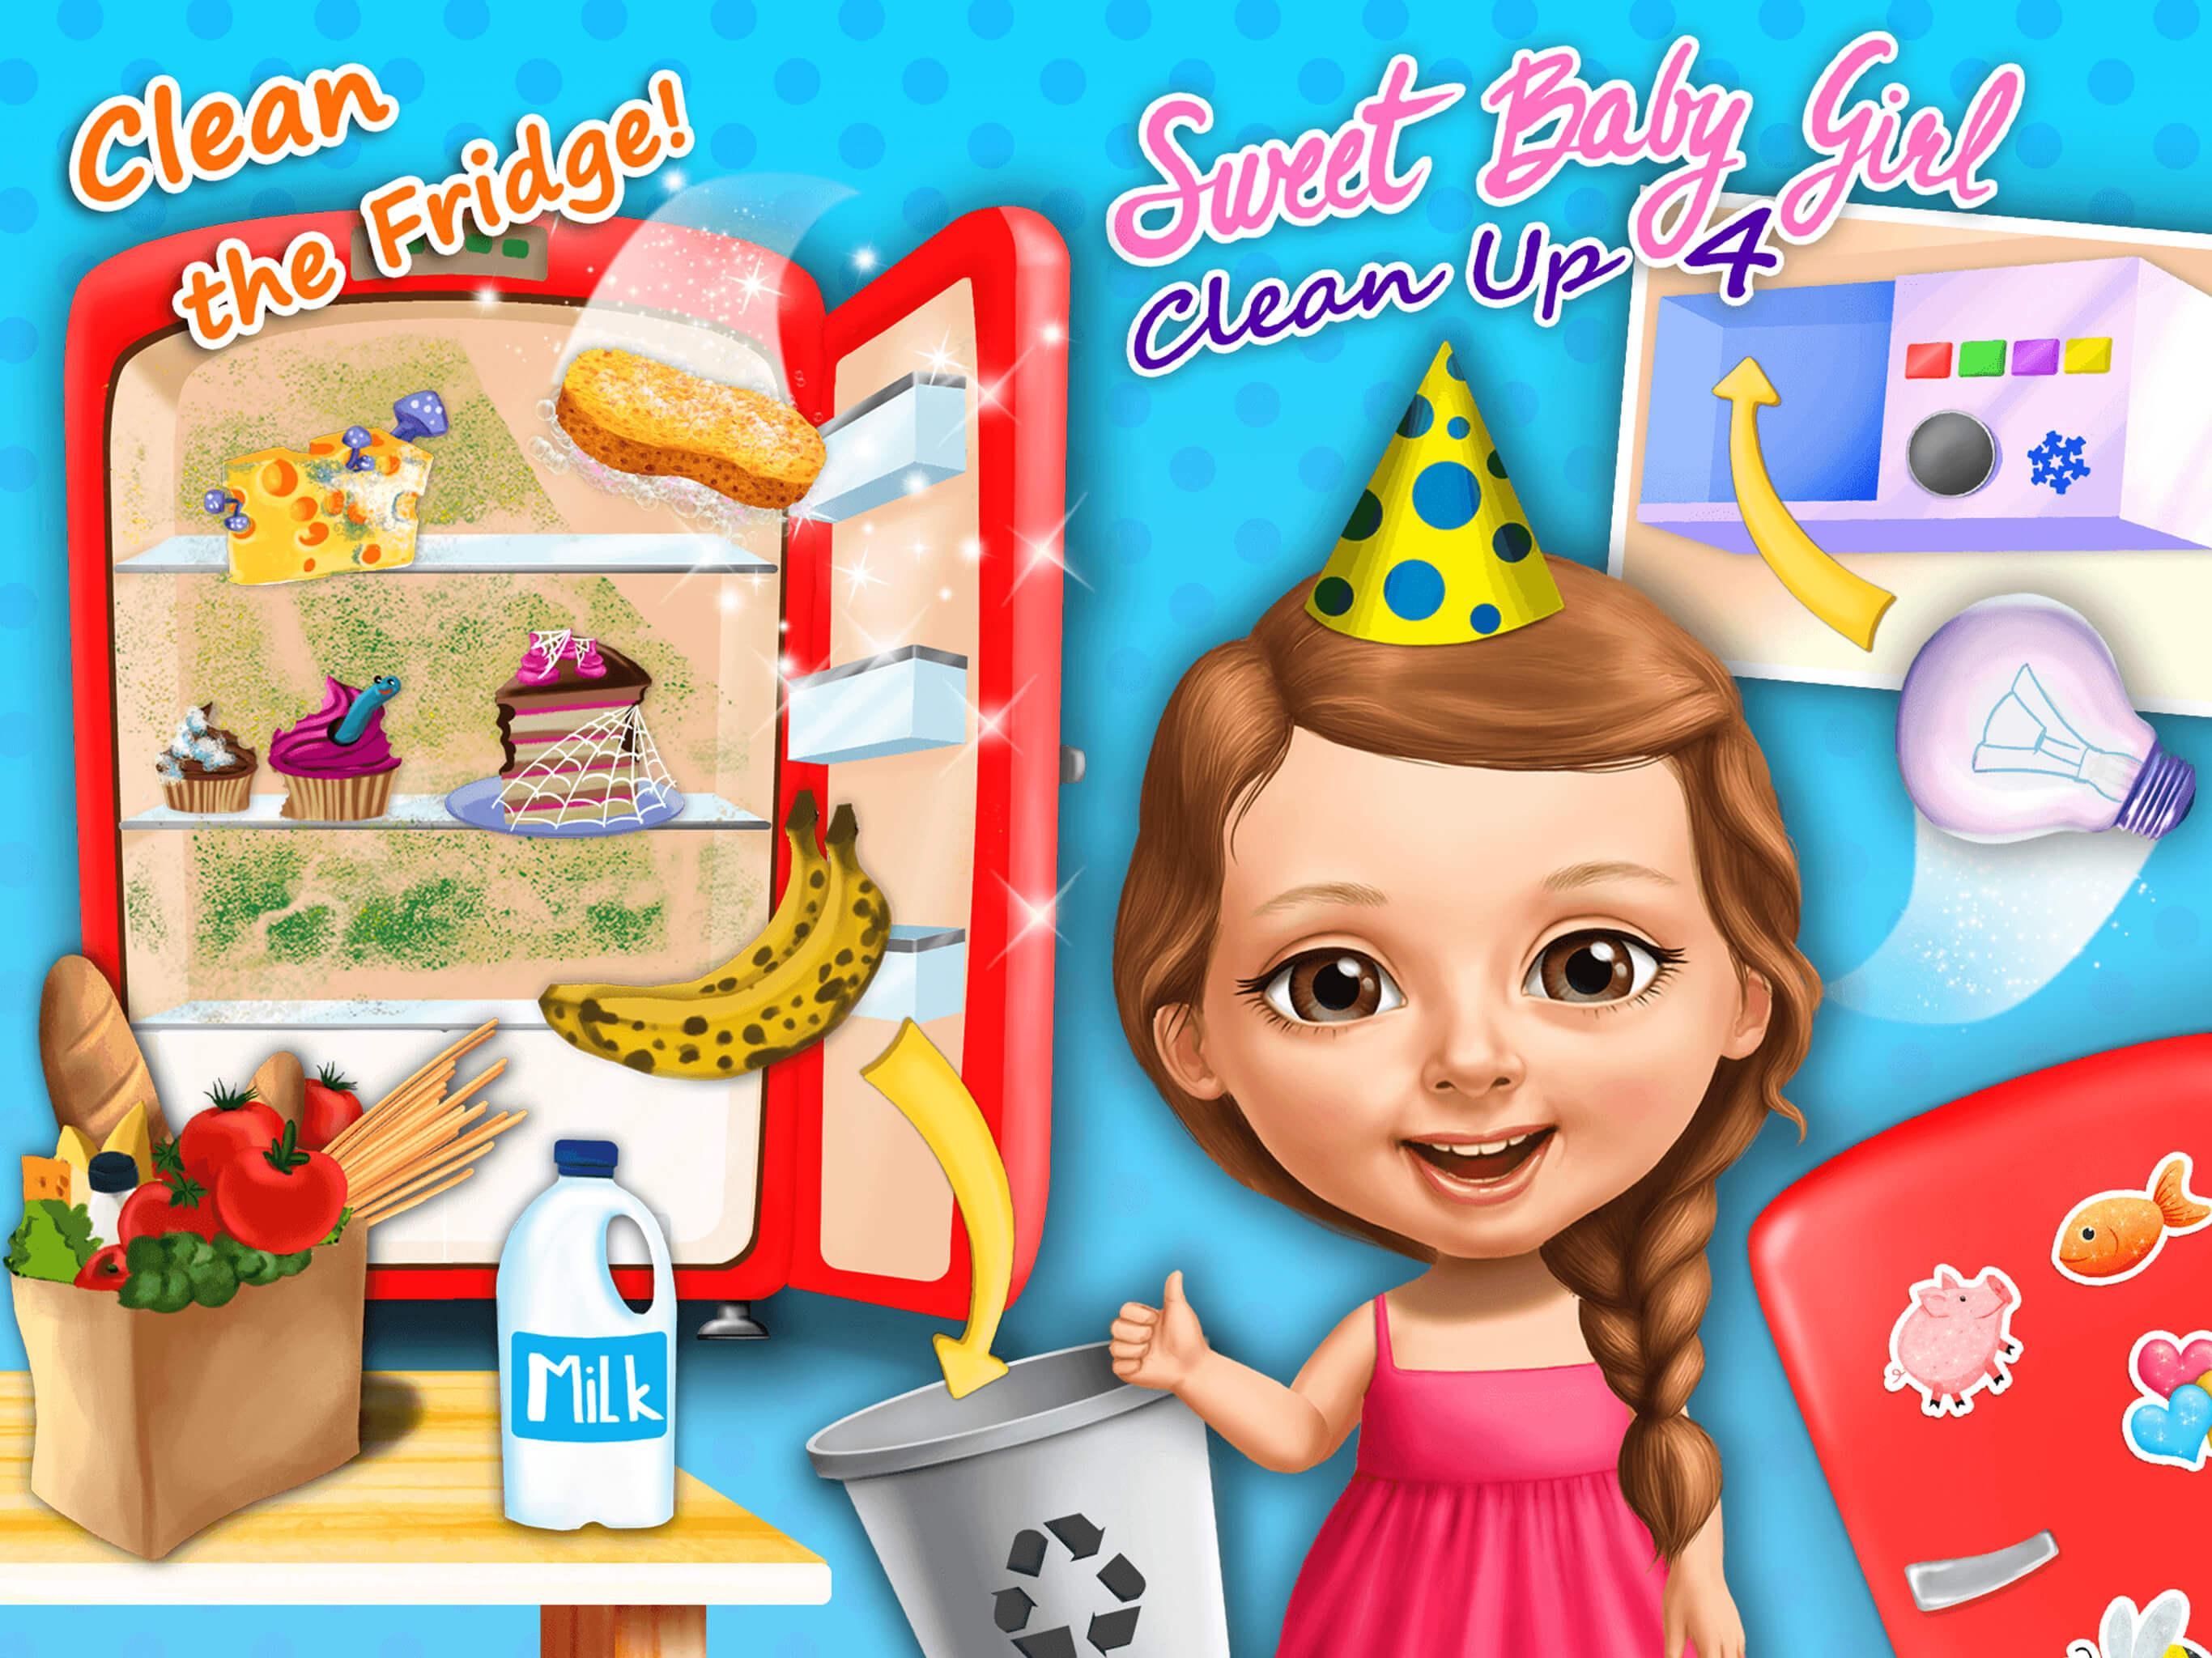 Sweet Baby Girl Cleanup 4 - House, Pool & Stable 4.0.10003 Screenshot 23